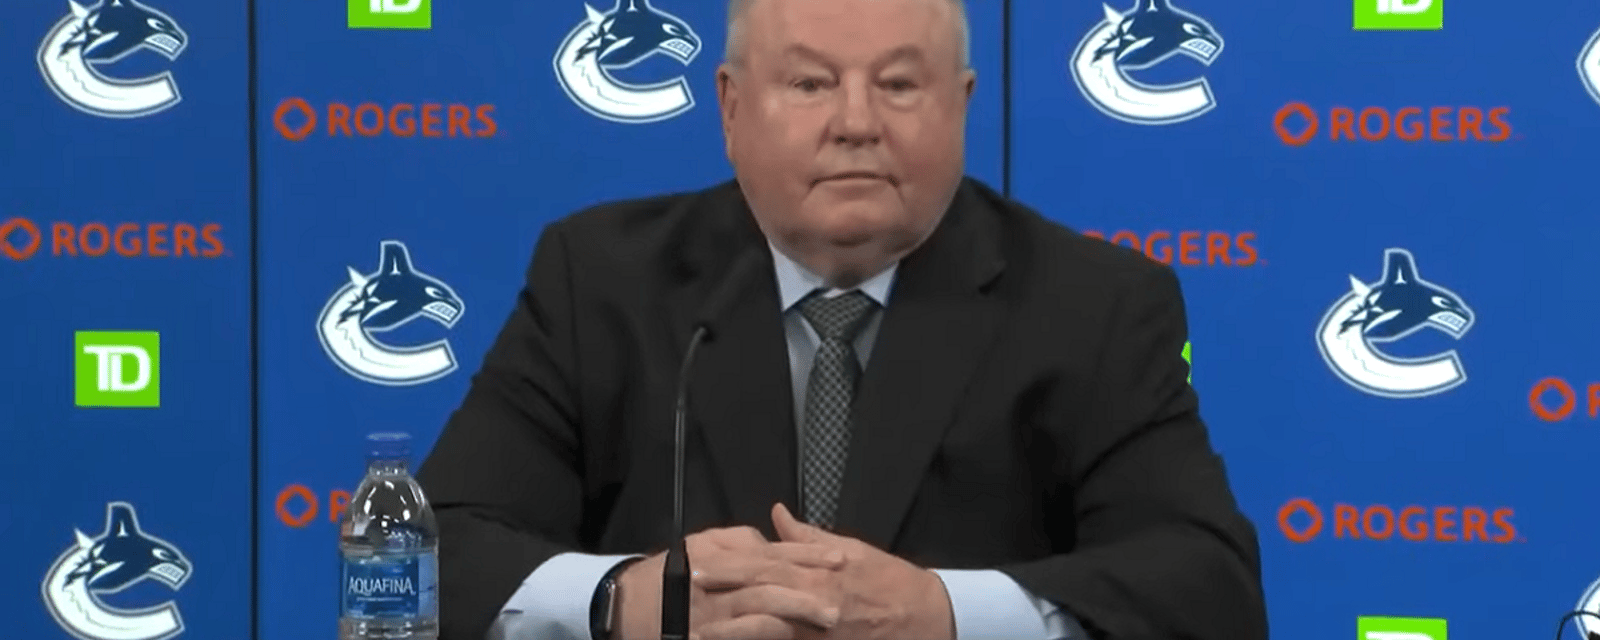 Former NHL players respond to Canucks' treatment of Bruce Boudreau.